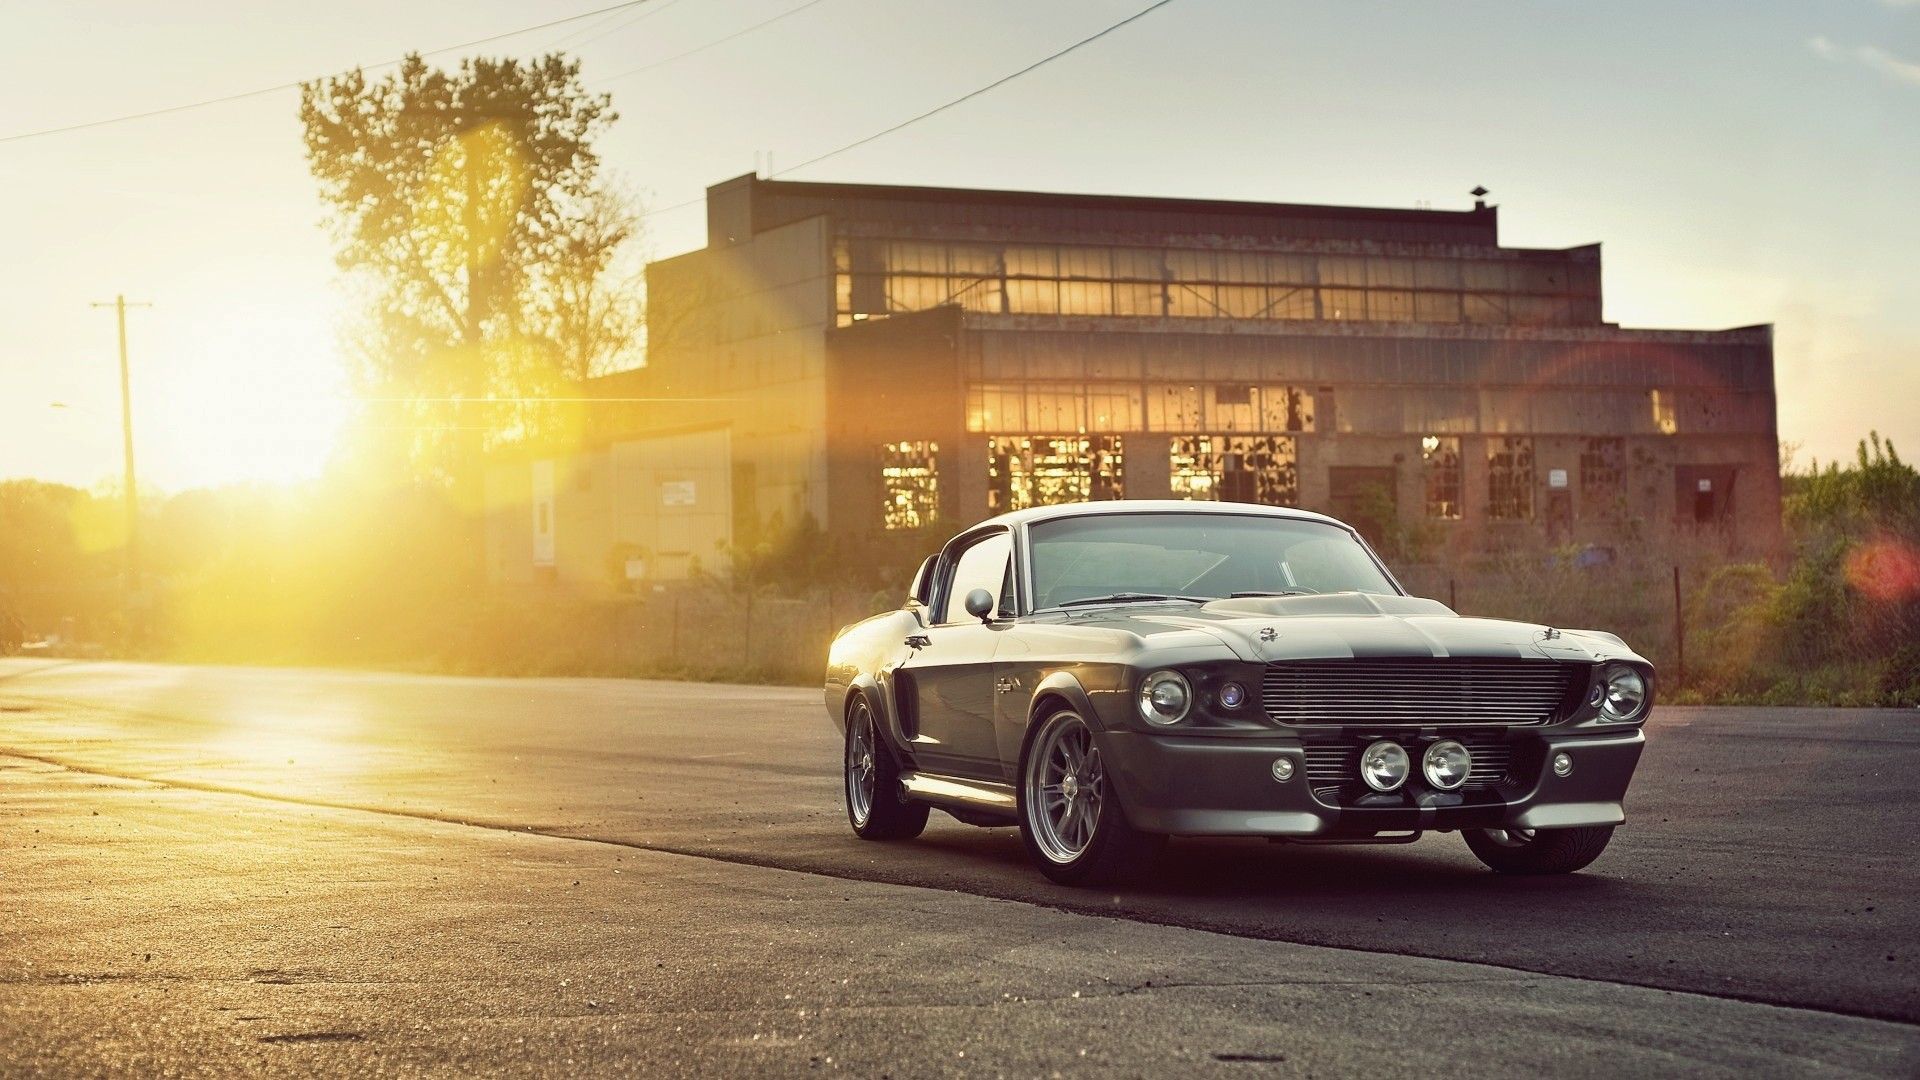 Old Muscle Car HD Background Wallpapers 5312 - HD Wallpapers Site